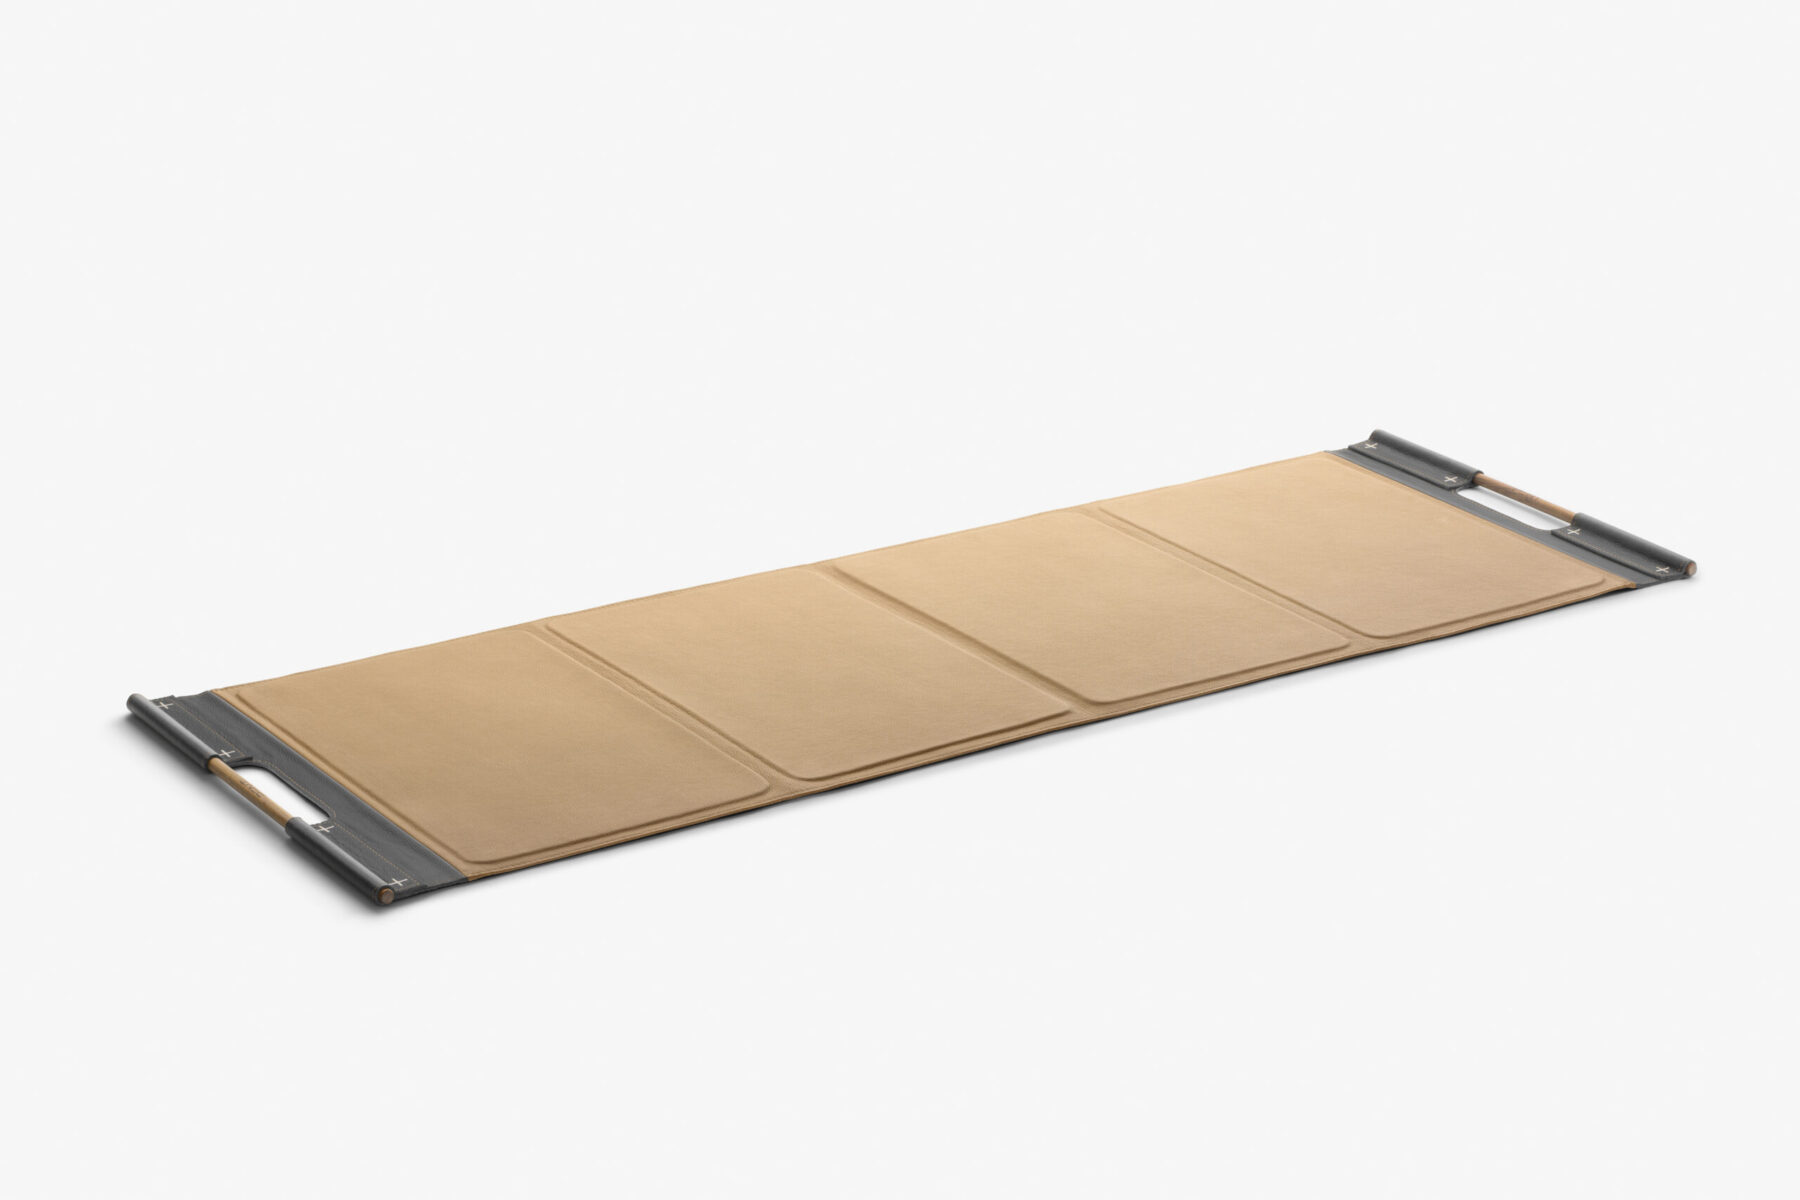 MATA™ luxury leather fitness mat helps prevent pains in your back | designboom